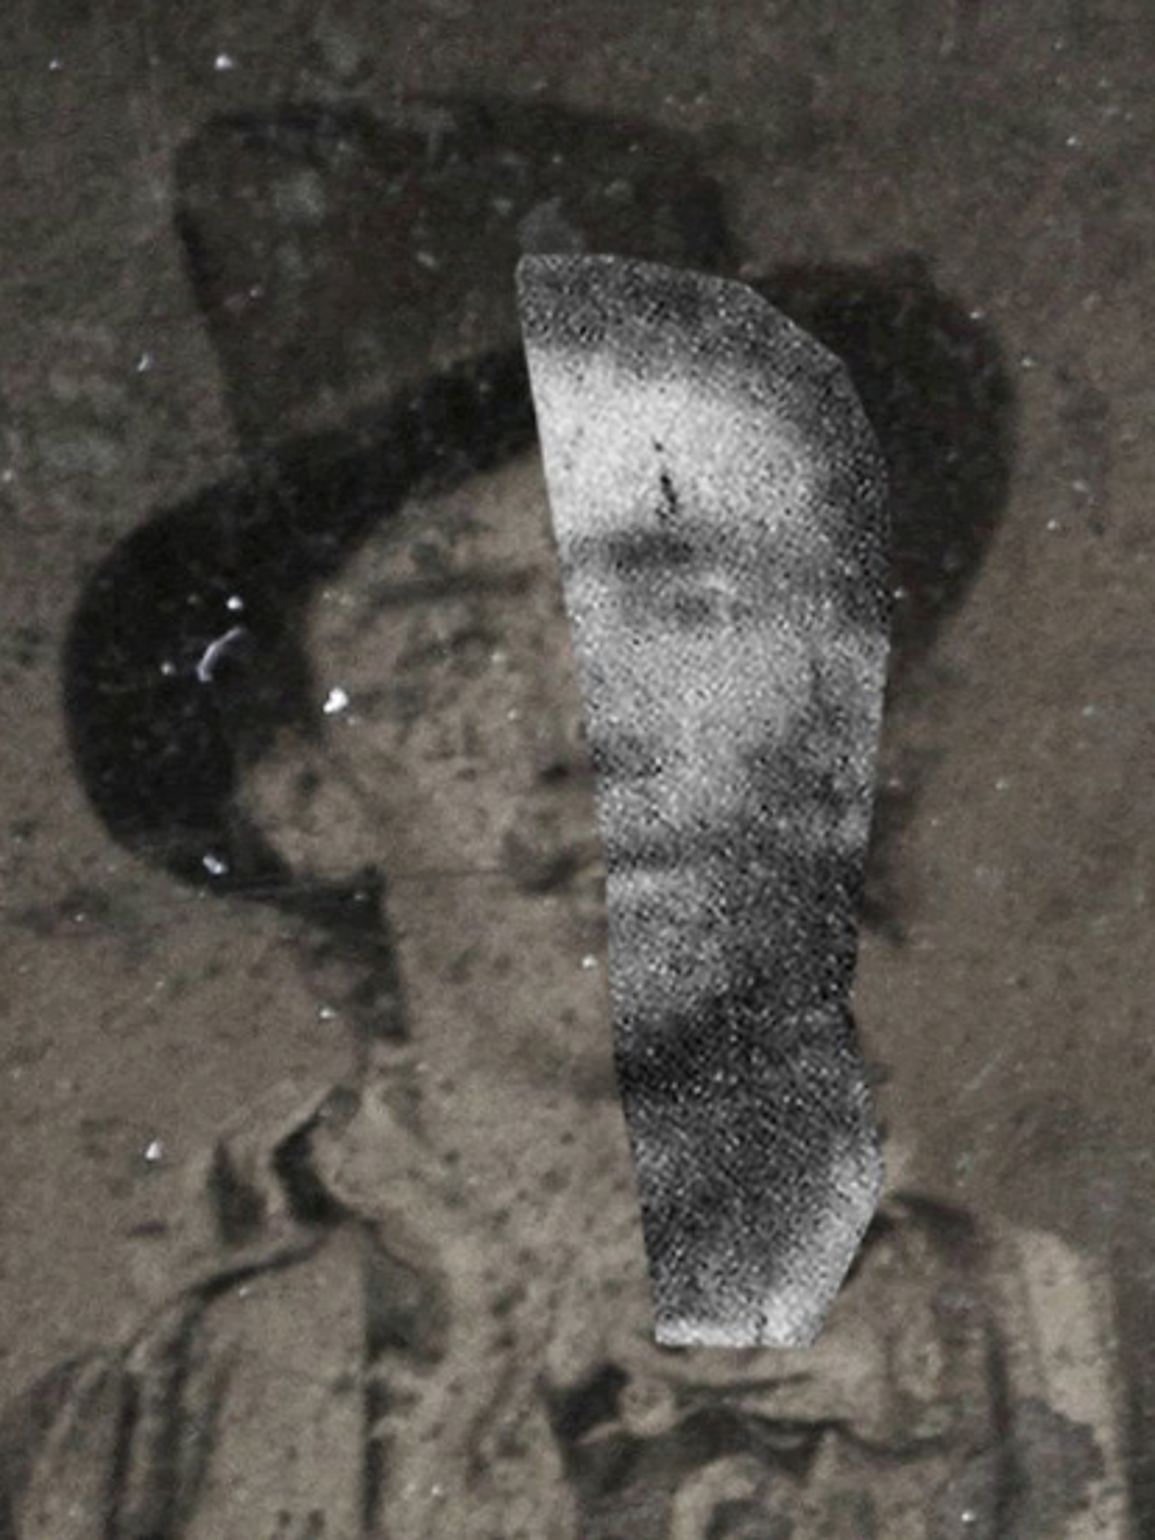 135-year-old image may capture famous outlaw Billy the Kid